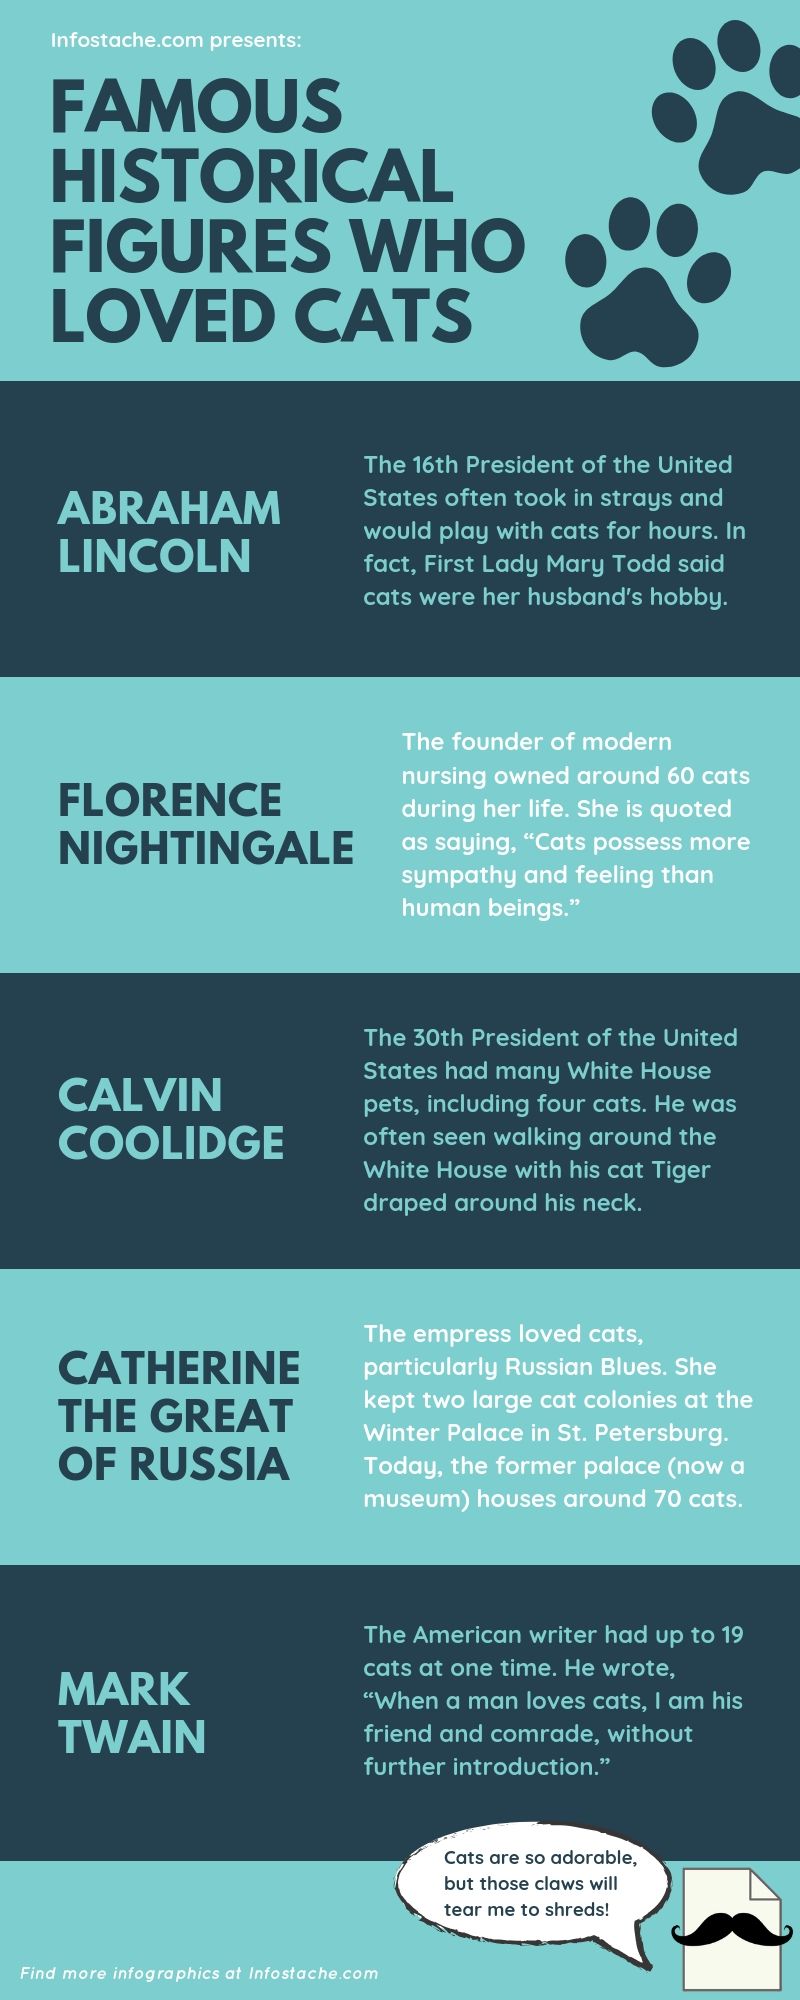 Famous Historical Figures Who Loved Cats - Infographic